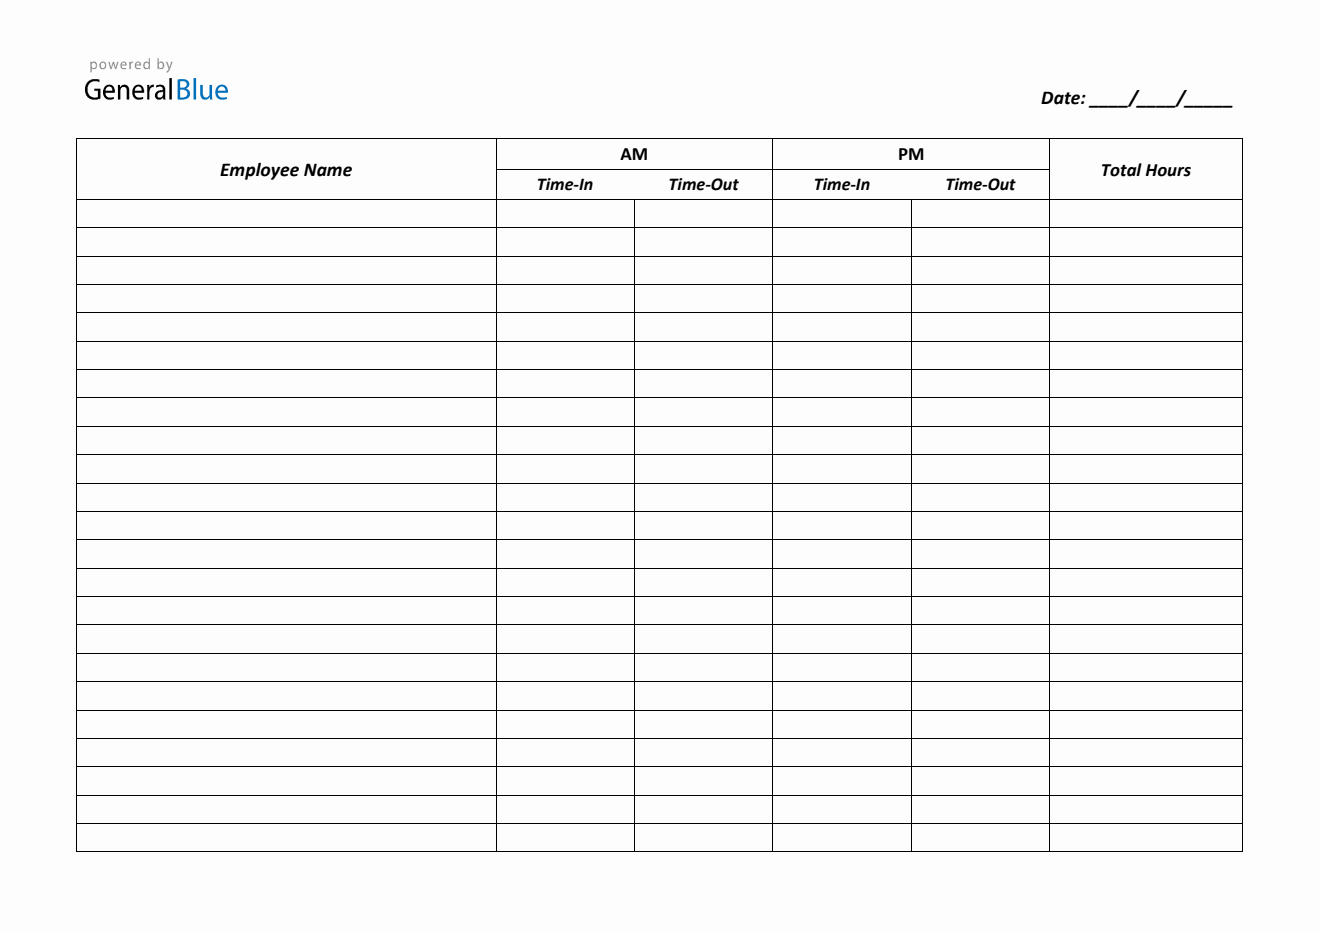 Printable Time-in and Time-Out Timesheet (Word, A4)